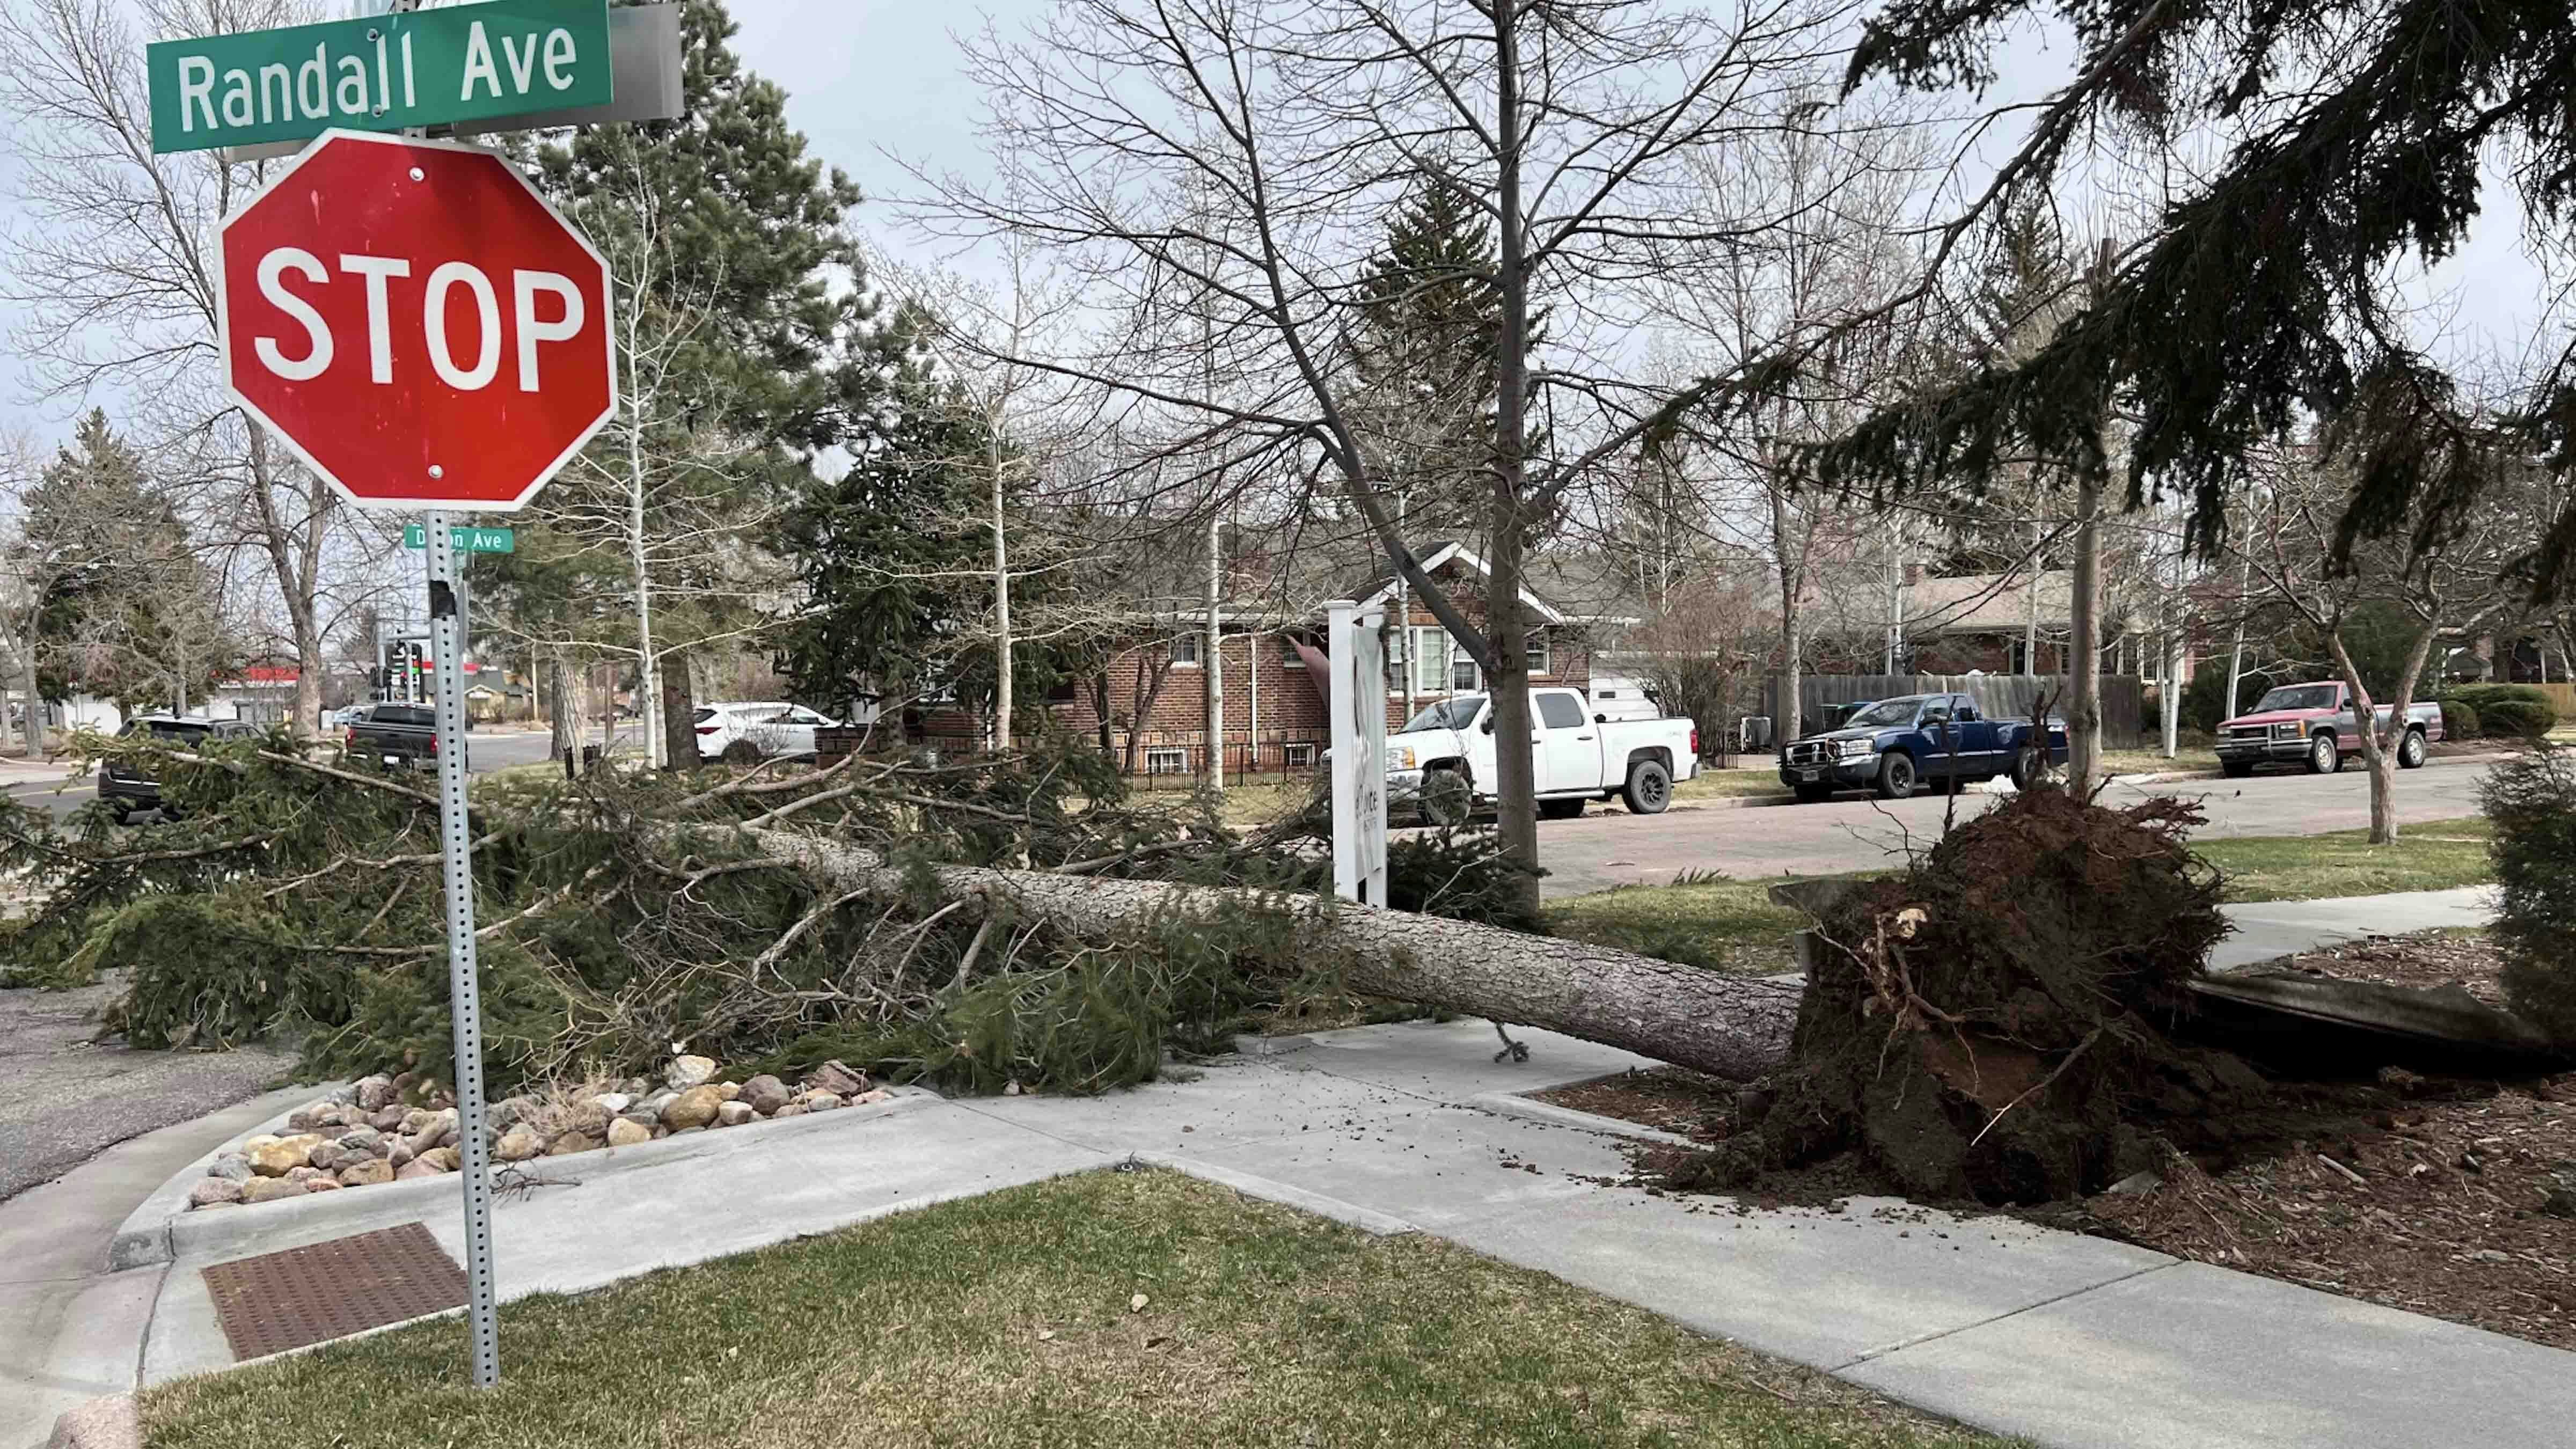 90 mph winds brought down trees in Cheyenne on Saturday